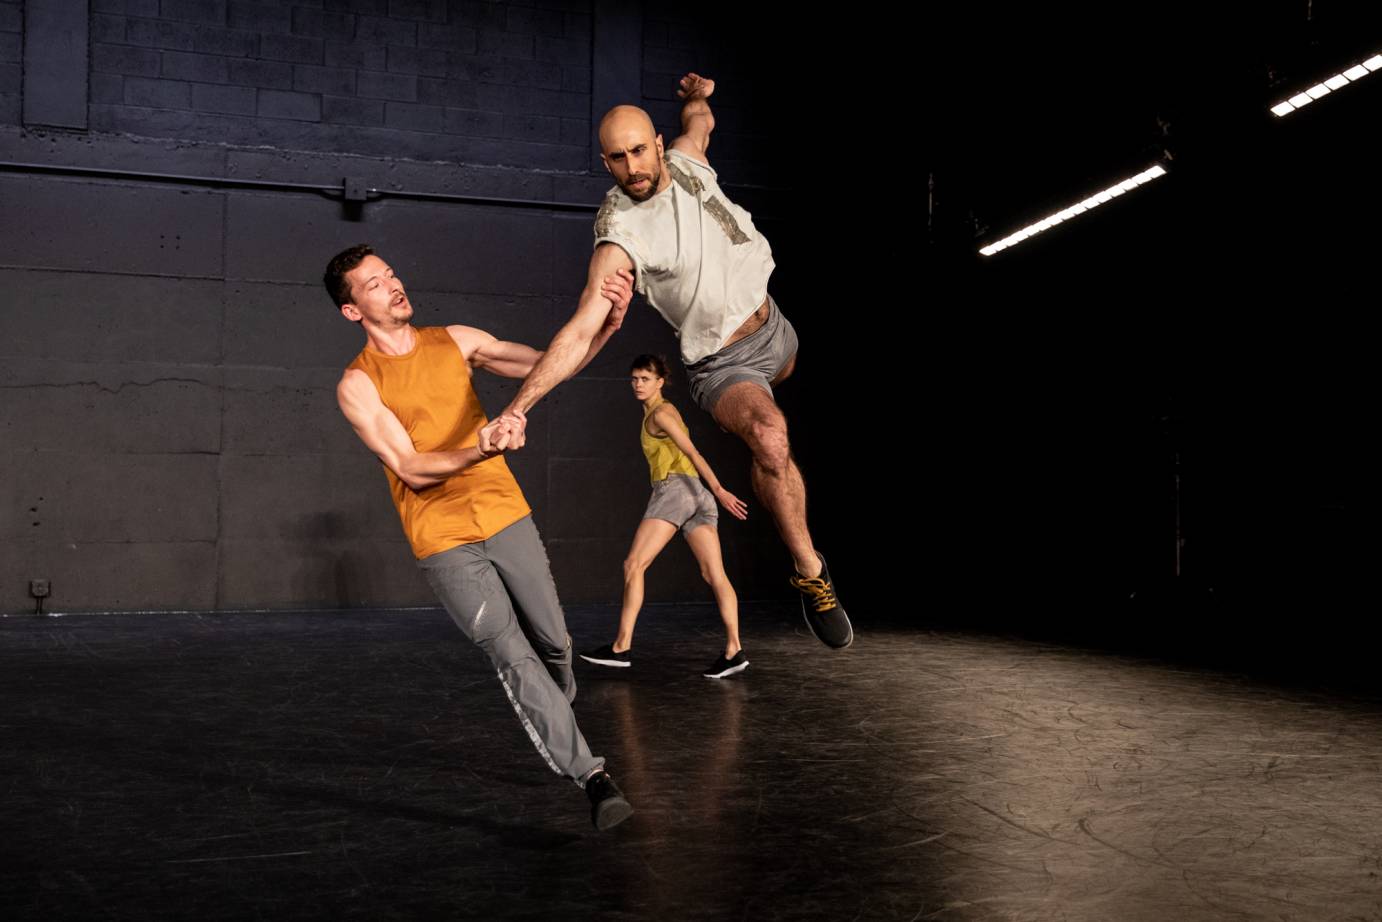 One man partners another in a stage leap as a woman looks on in the background